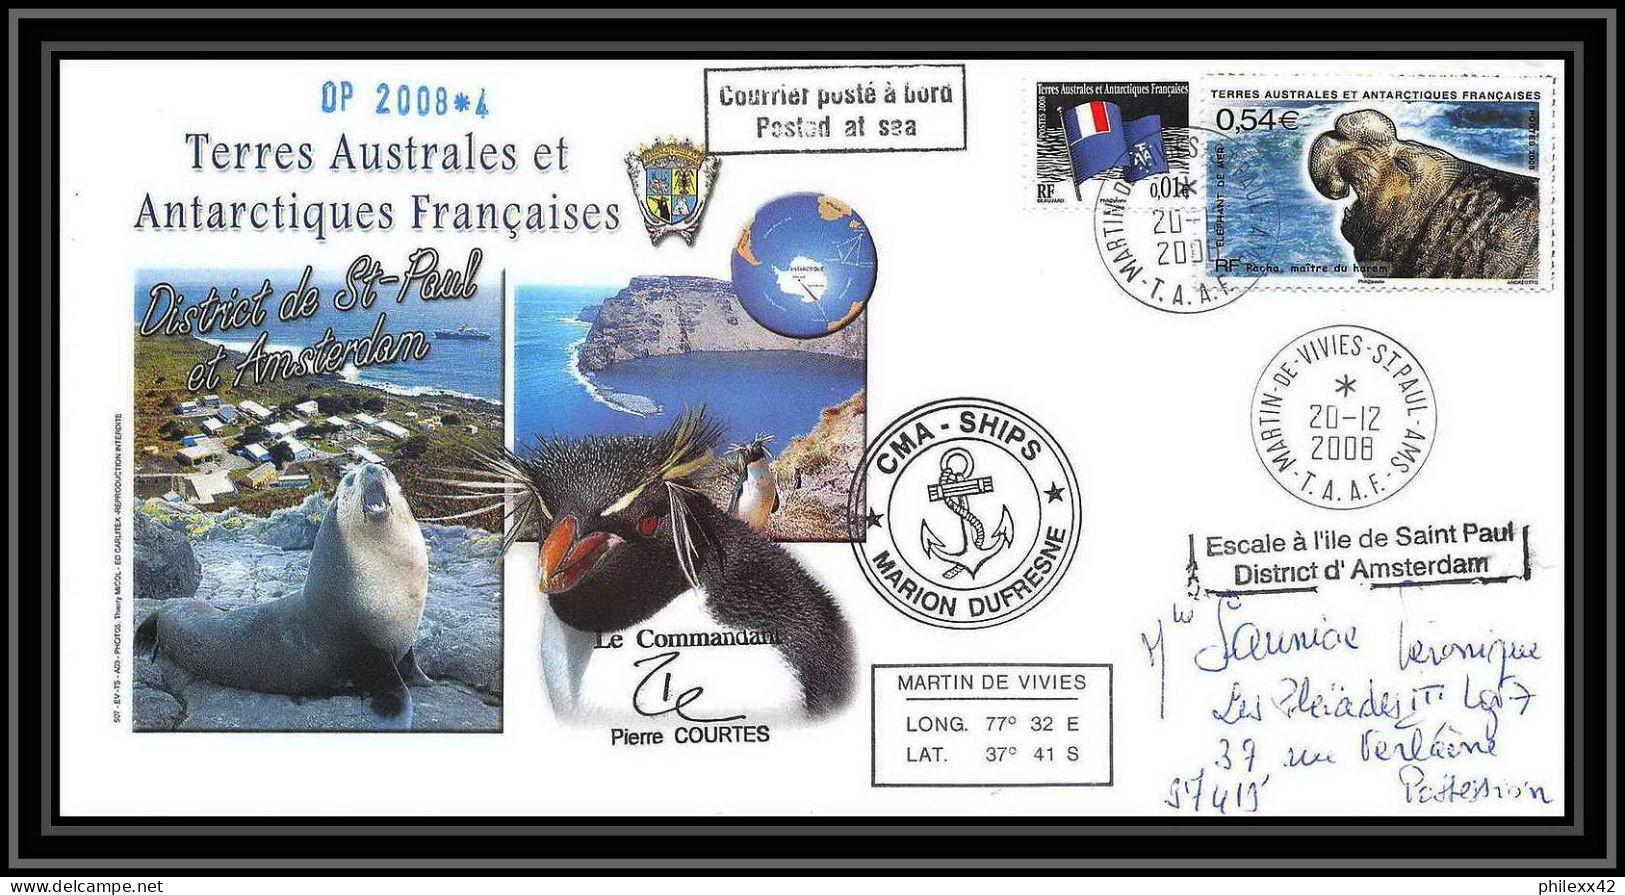 2871 Sea Elephant Terres Australes TAAF Helilagon Lettre Cover Dufresne Signé Signed Op 2008/4 St Paul 20/12/2008 N°511 - Hélicoptères